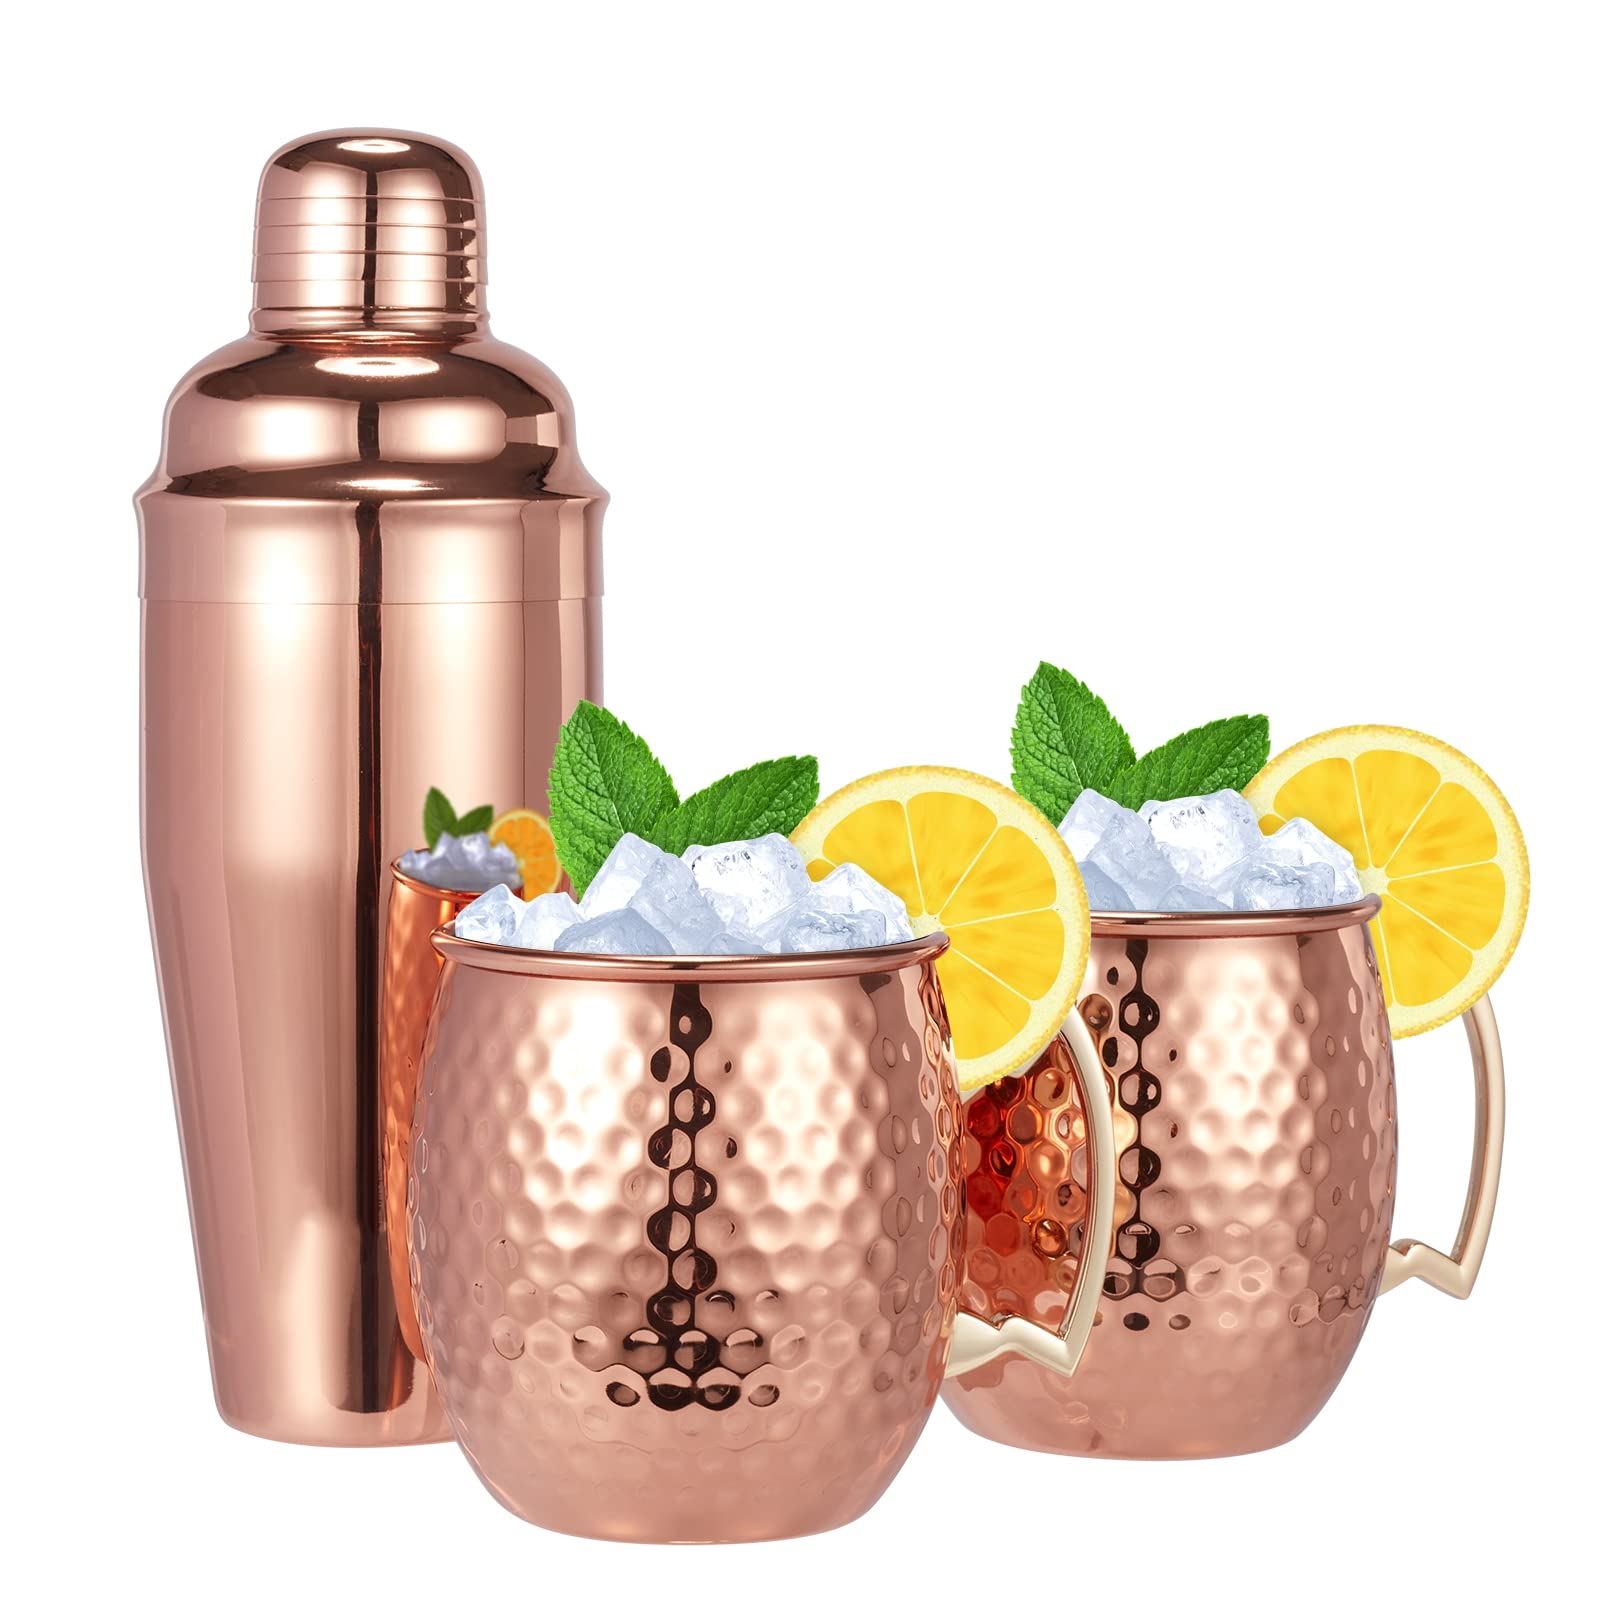 Moscow Mule Mugs Set of 3-Hammered Moscow Mule Mugs Drinking Cup with 24oz Cocktail Shaker-Great Dining Entertaining bar Gift Set (Mug Set of 3 -Cocktail Shaker Included)